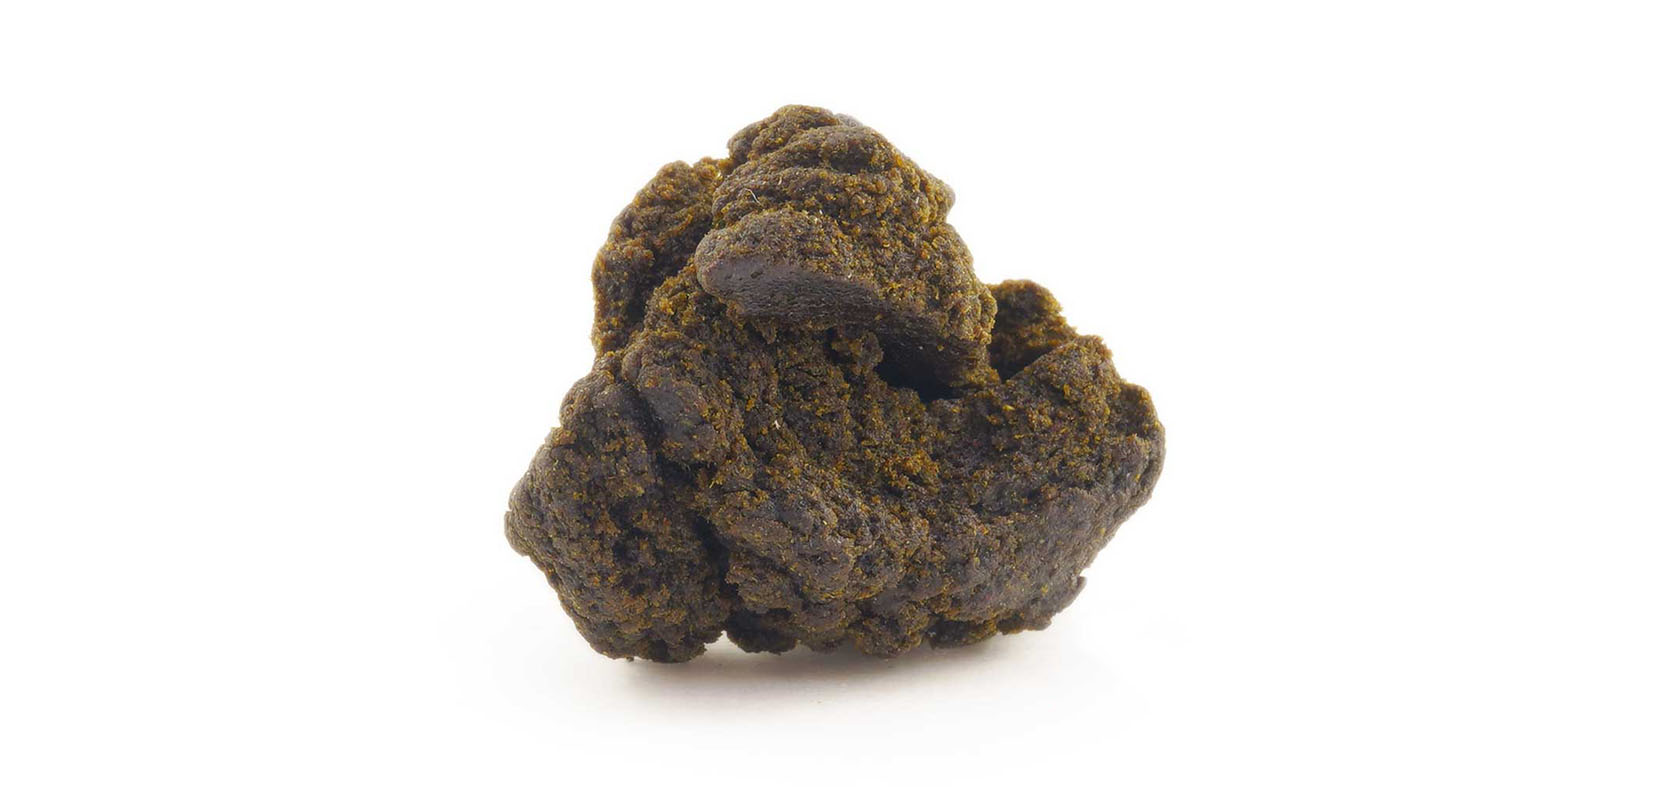 Hash Online in Canada available from wccannabis dispensary for cannabis concentrates, hashish, and weed online Canada. budget buds and cheapweed.